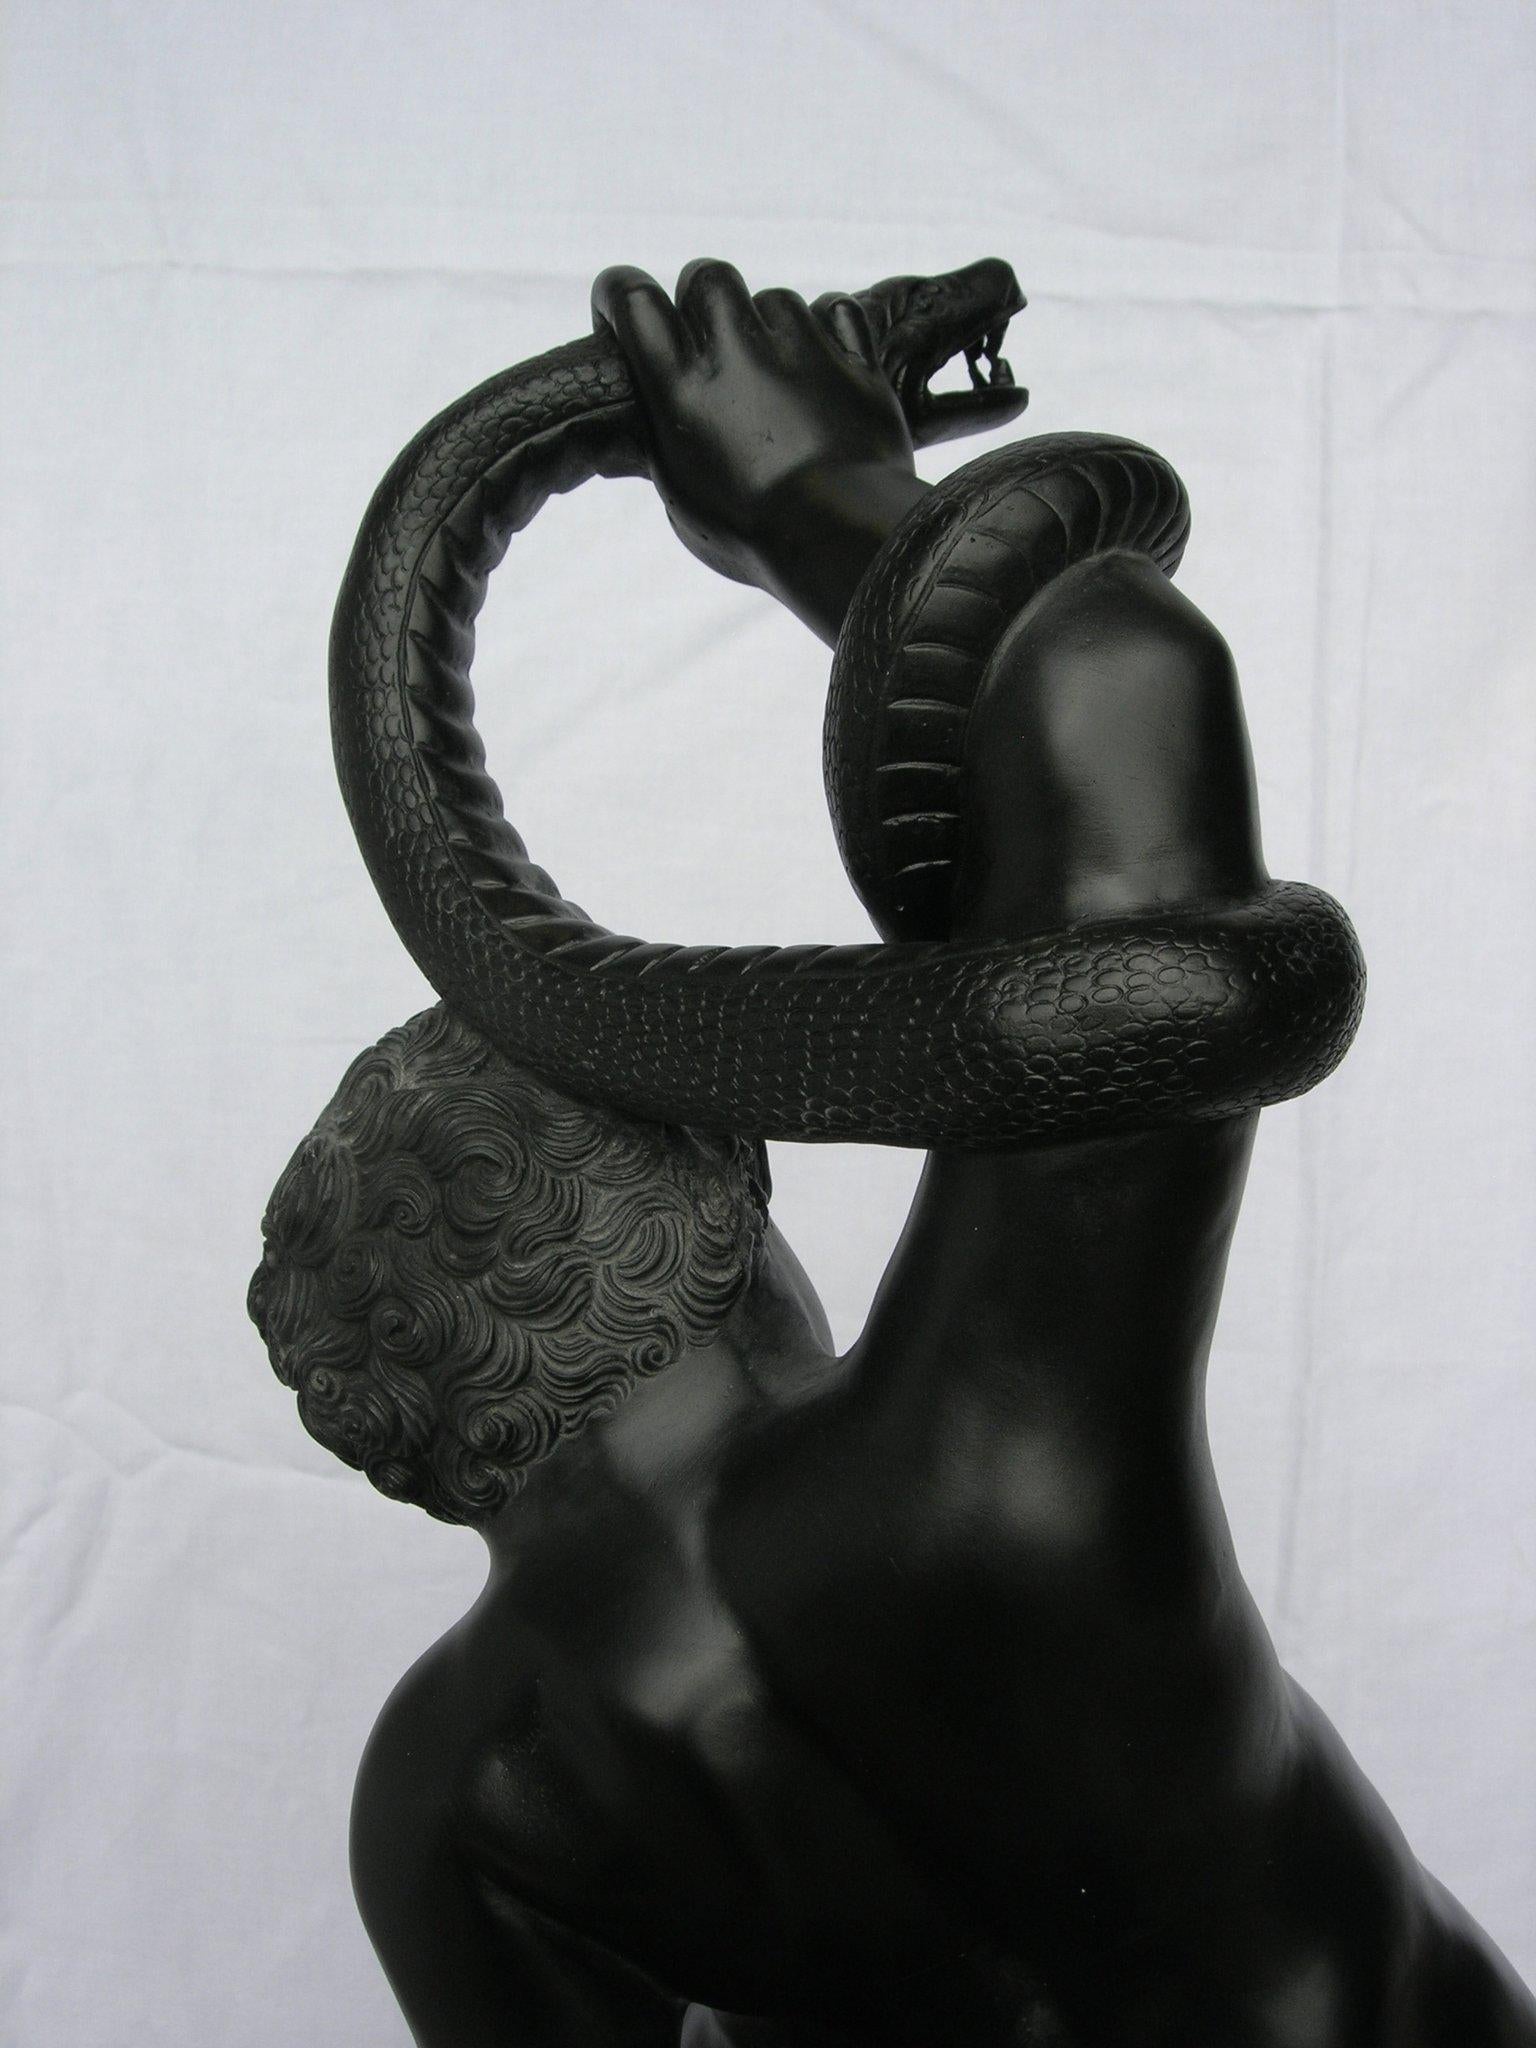 The Young Hercules, Basalt Black Marble Sculpture, 20th Century For Sale 3